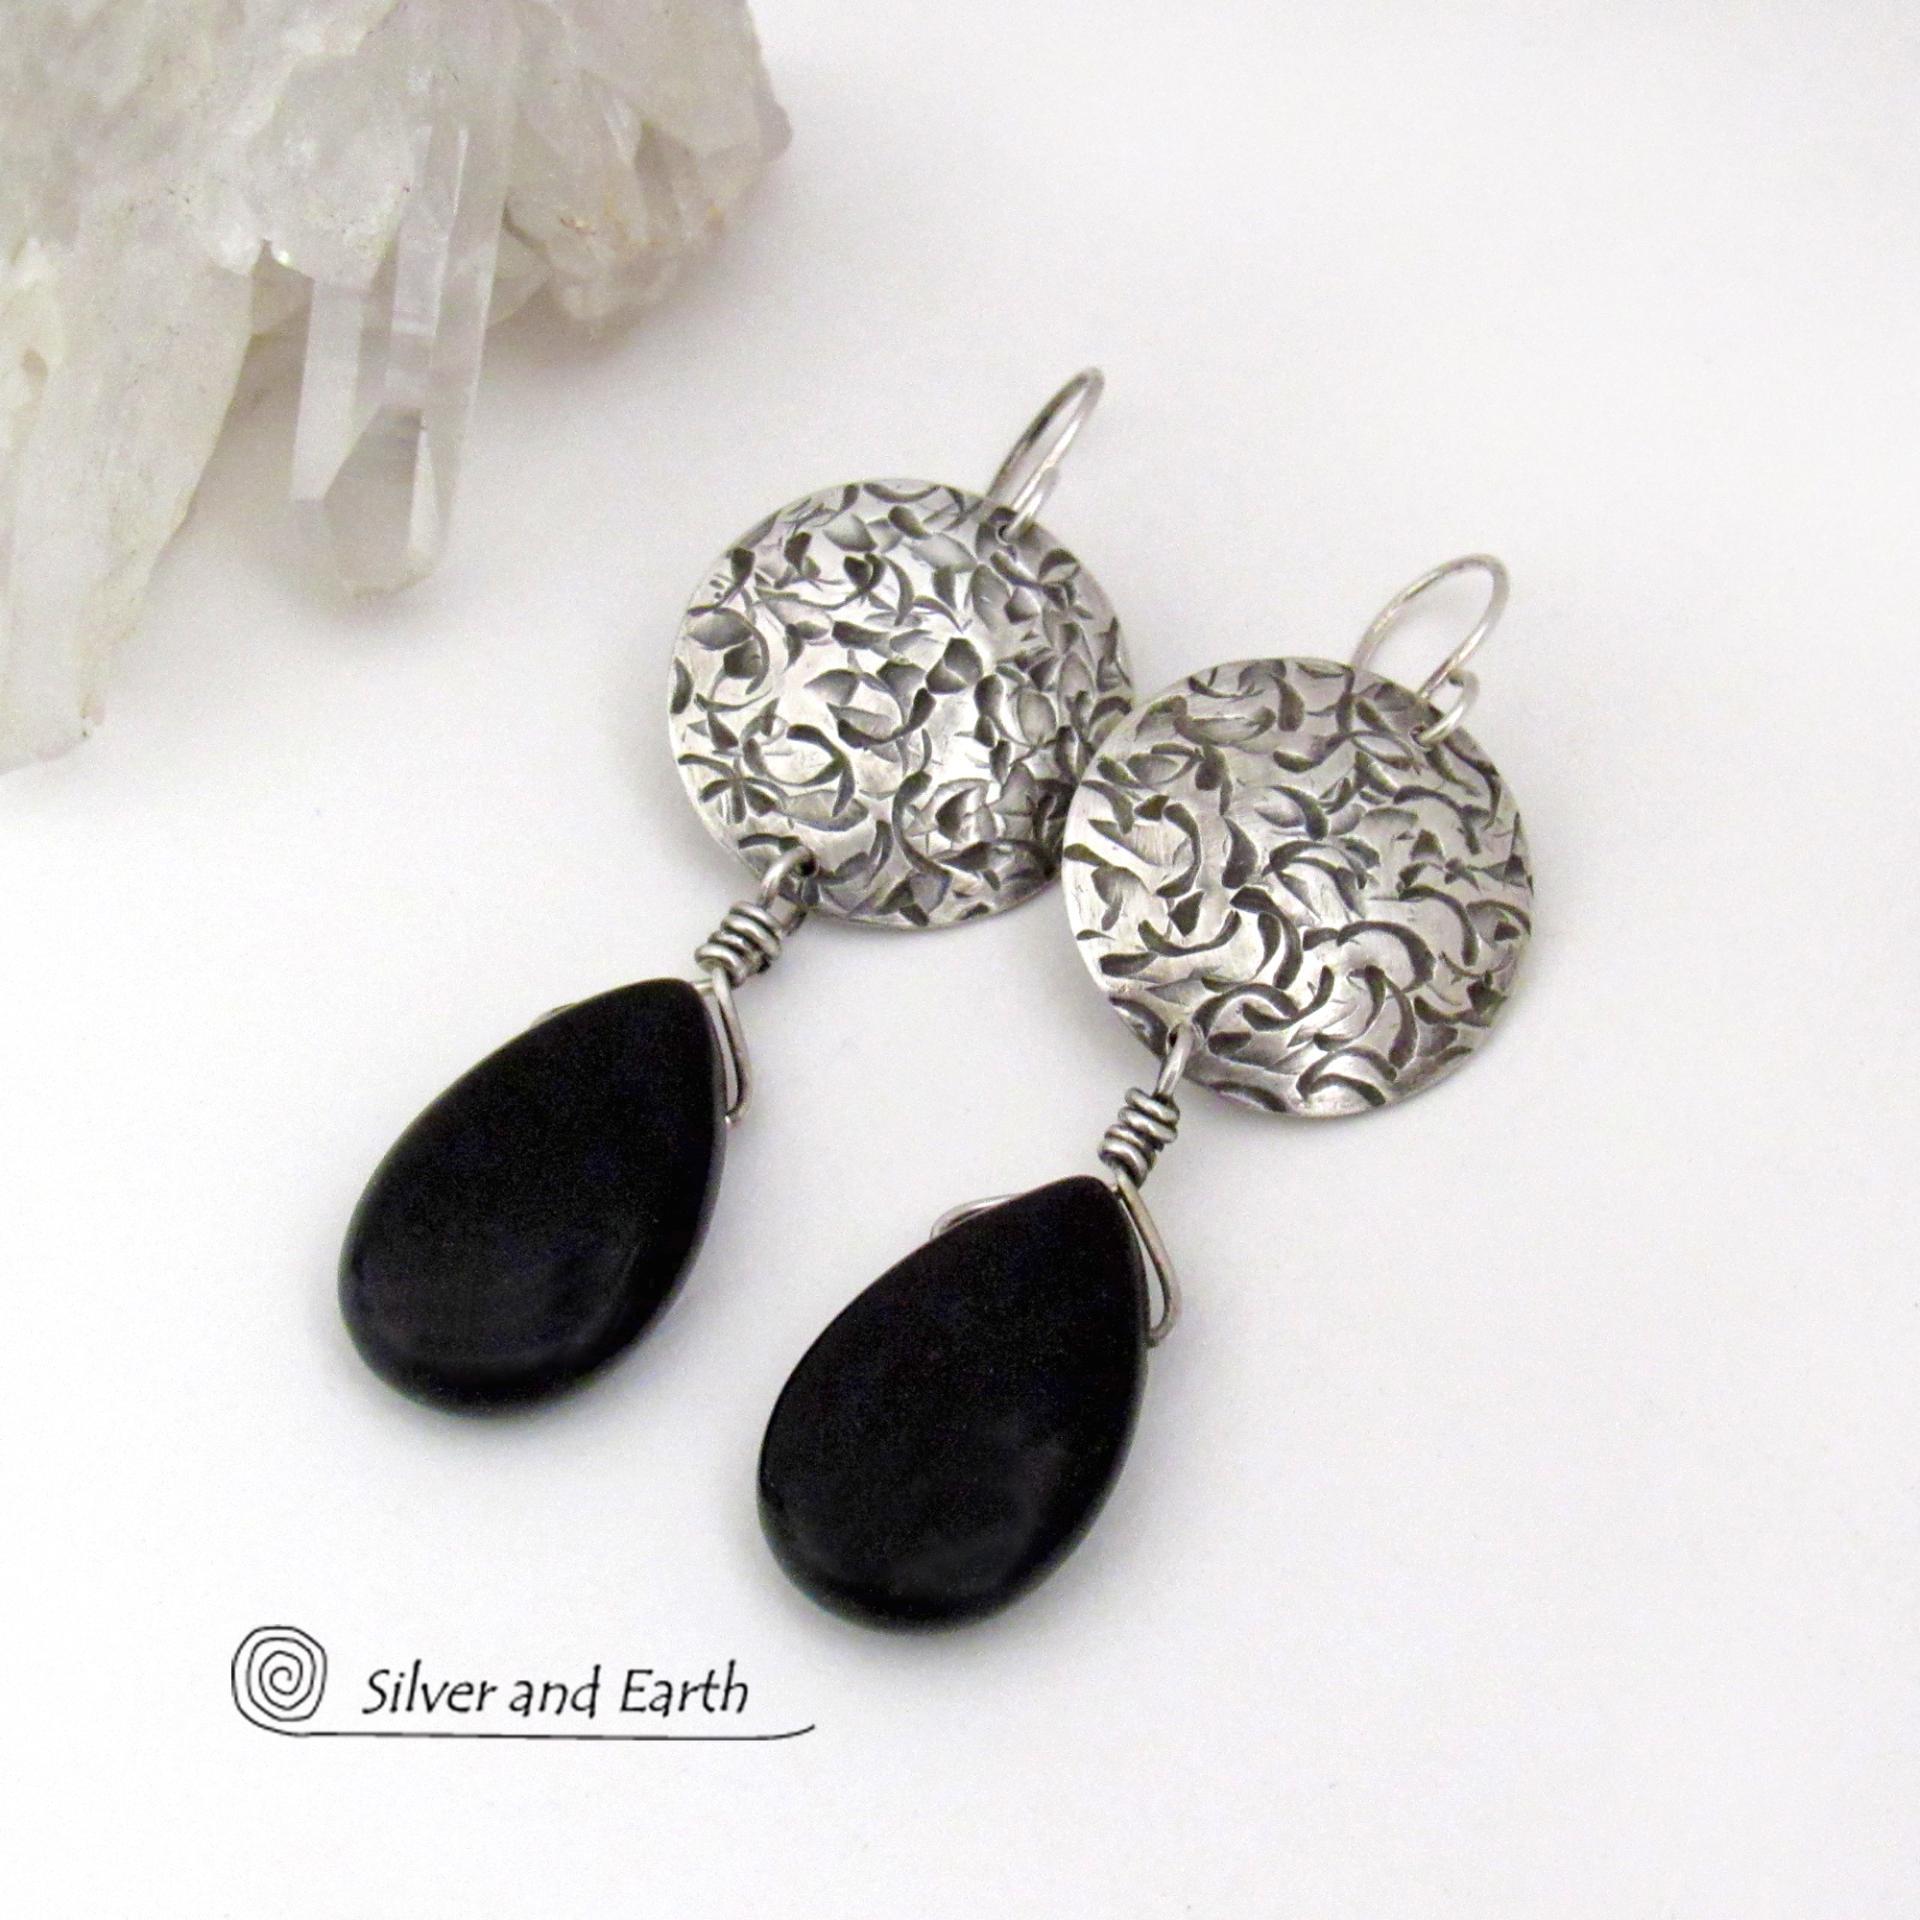 Sterling Silver Earrings with Dangling Black Onyx Gemstones - Handcrafted Silver Jewelry